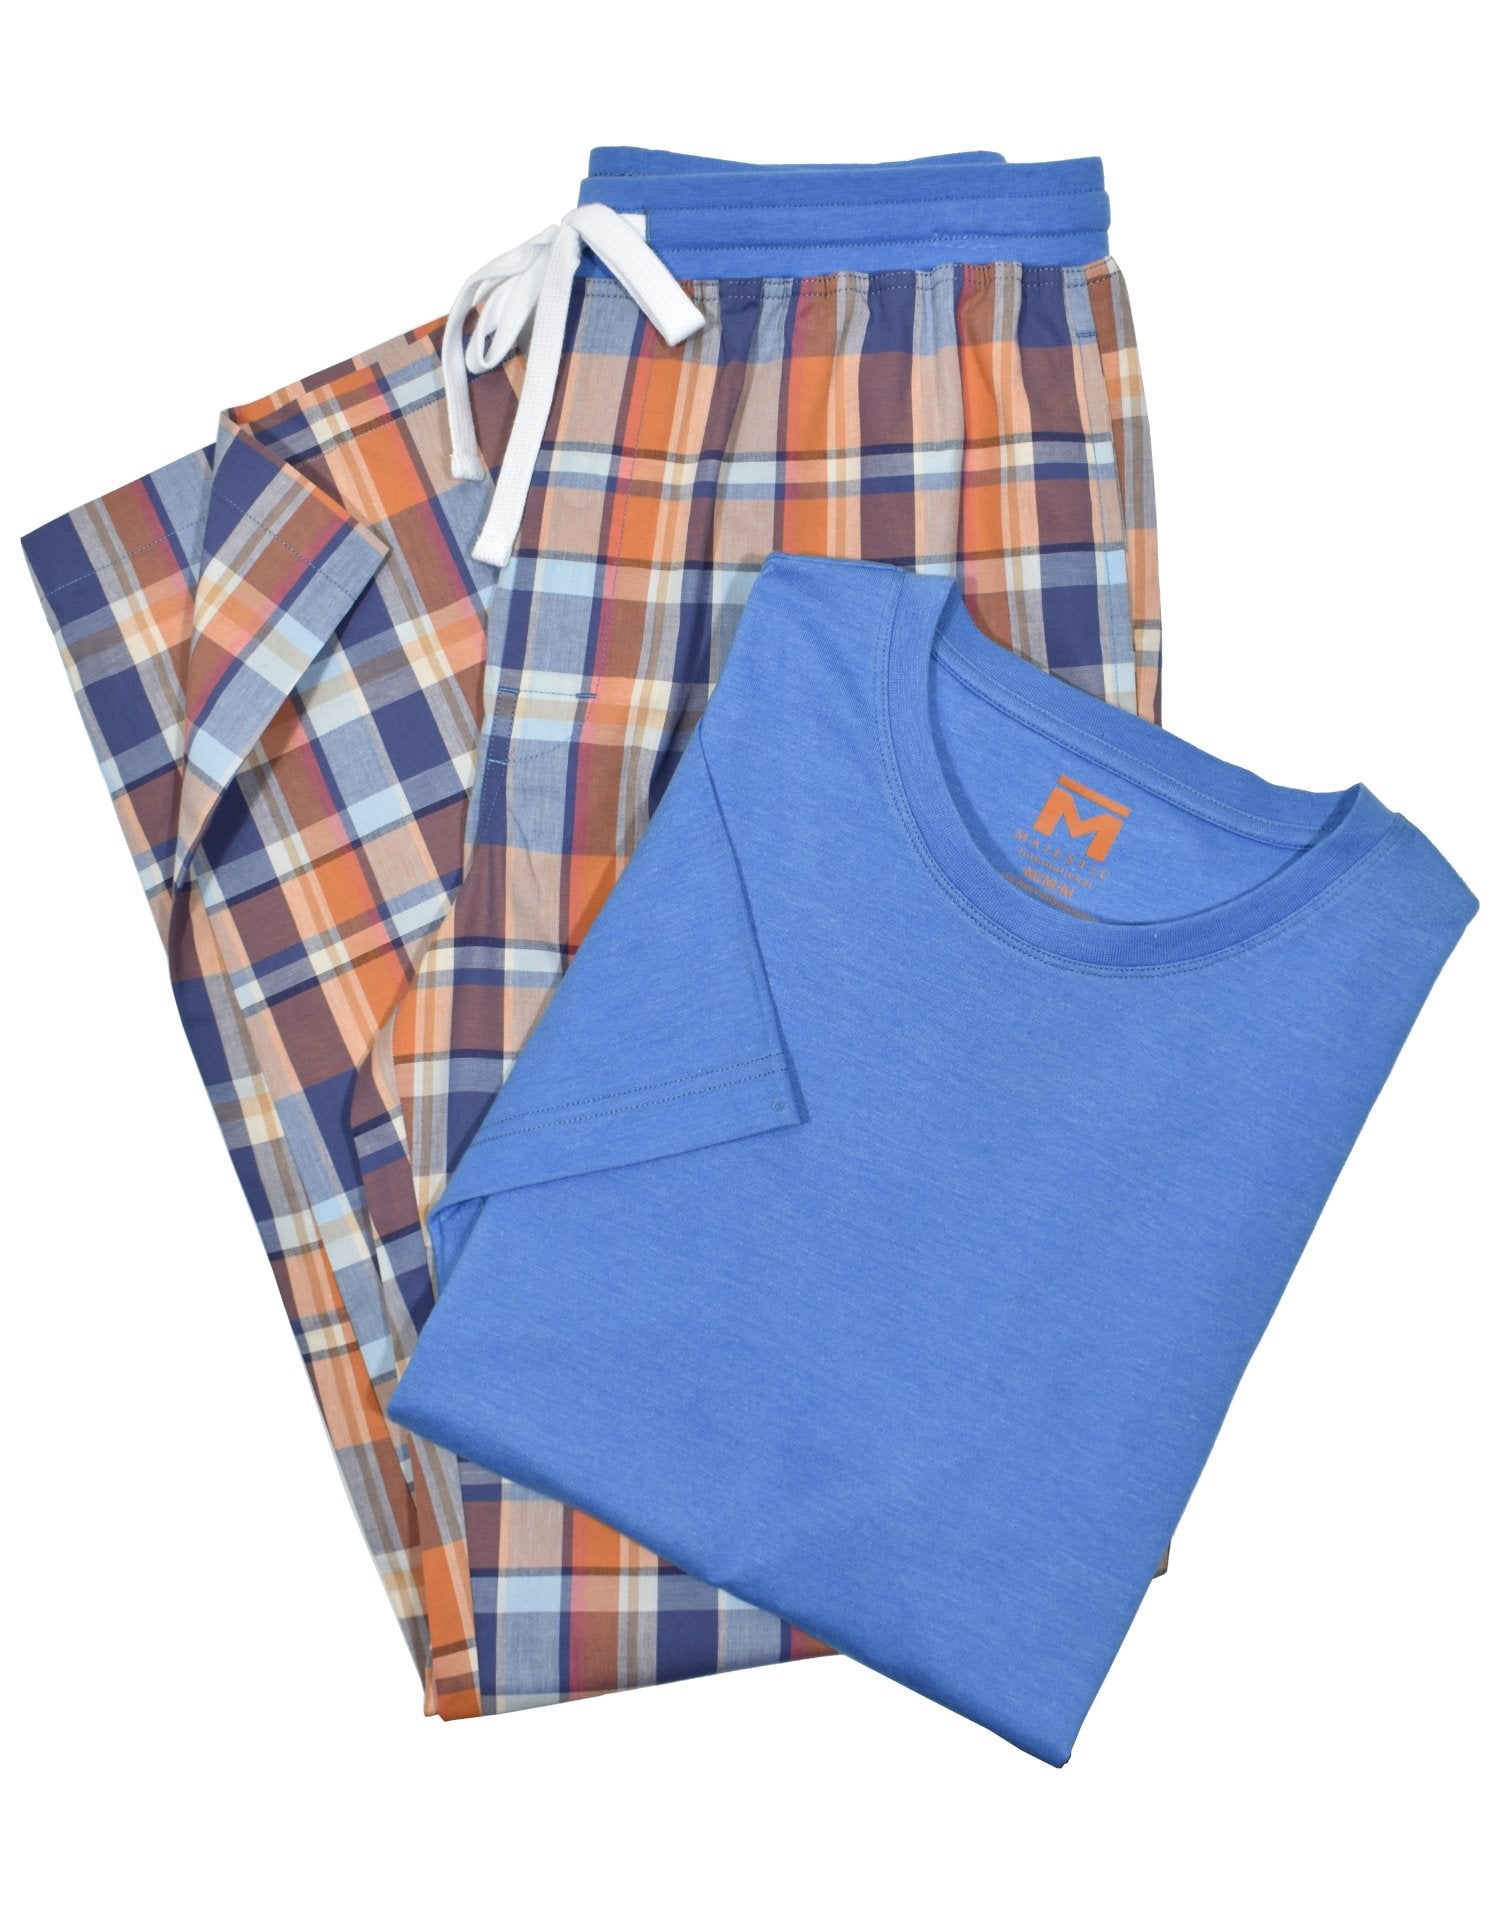 The Cavalier and Florida ZM21180 Leisure Set is perfect for Spring/Summer. Crafted from lightweight cotton, the drawstring pants feature a traditional plaid design in vibrant shades of orange and blue. Paired with a soft, royal blue Pima tee, this set offers both comfort and style. Perfect for relaxation and leisure time.